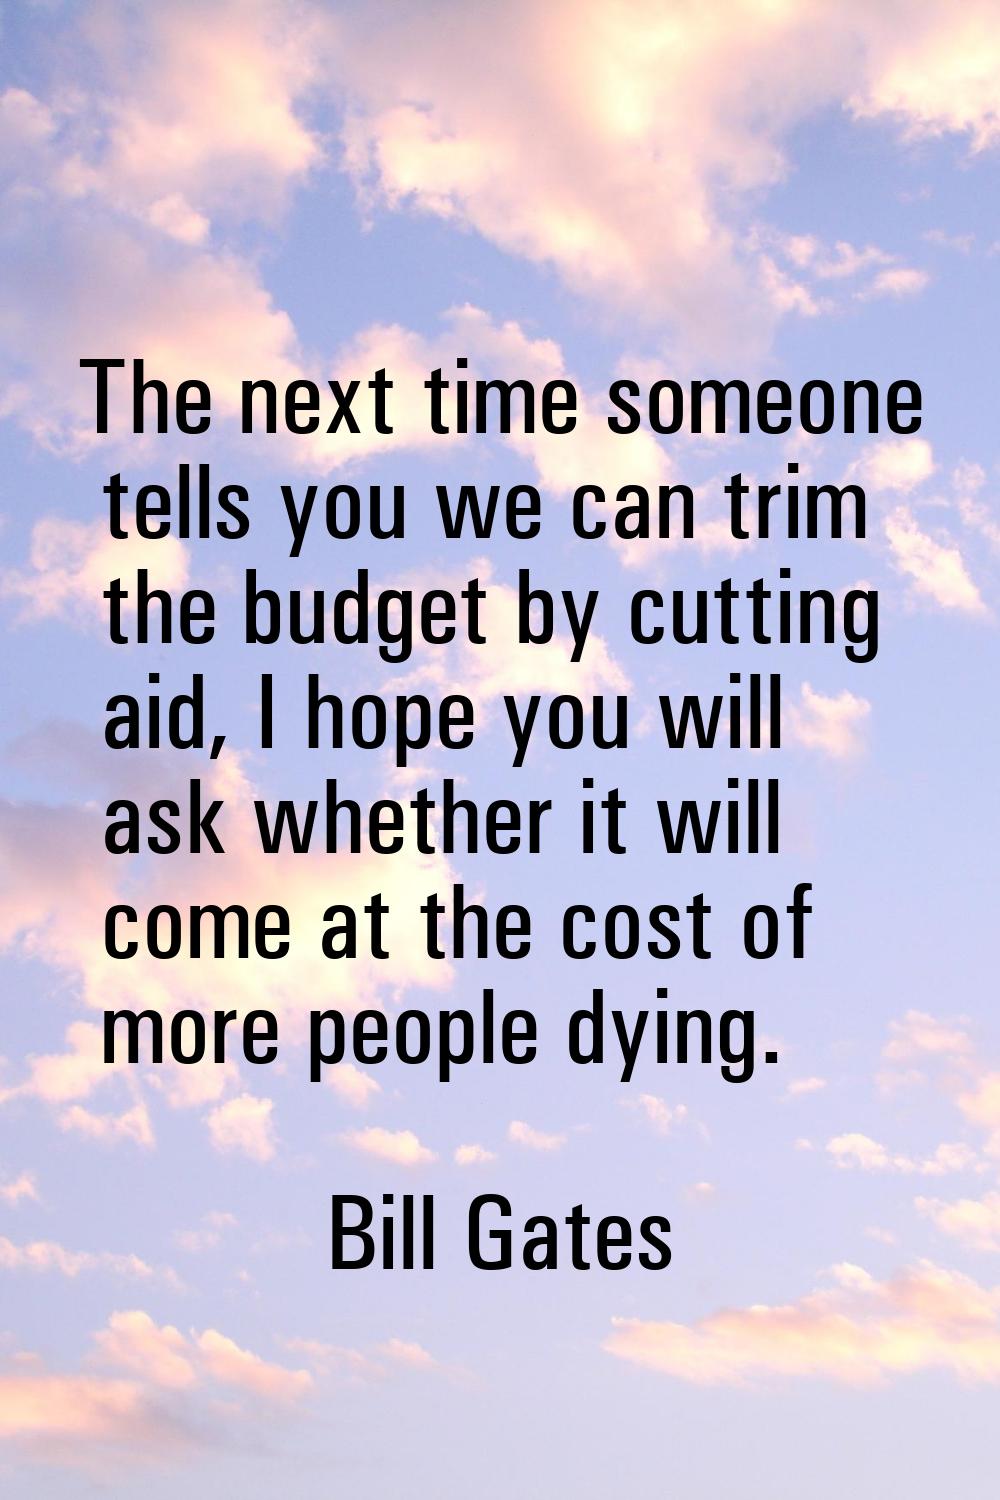 The next time someone tells you we can trim the budget by cutting aid, I hope you will ask whether 